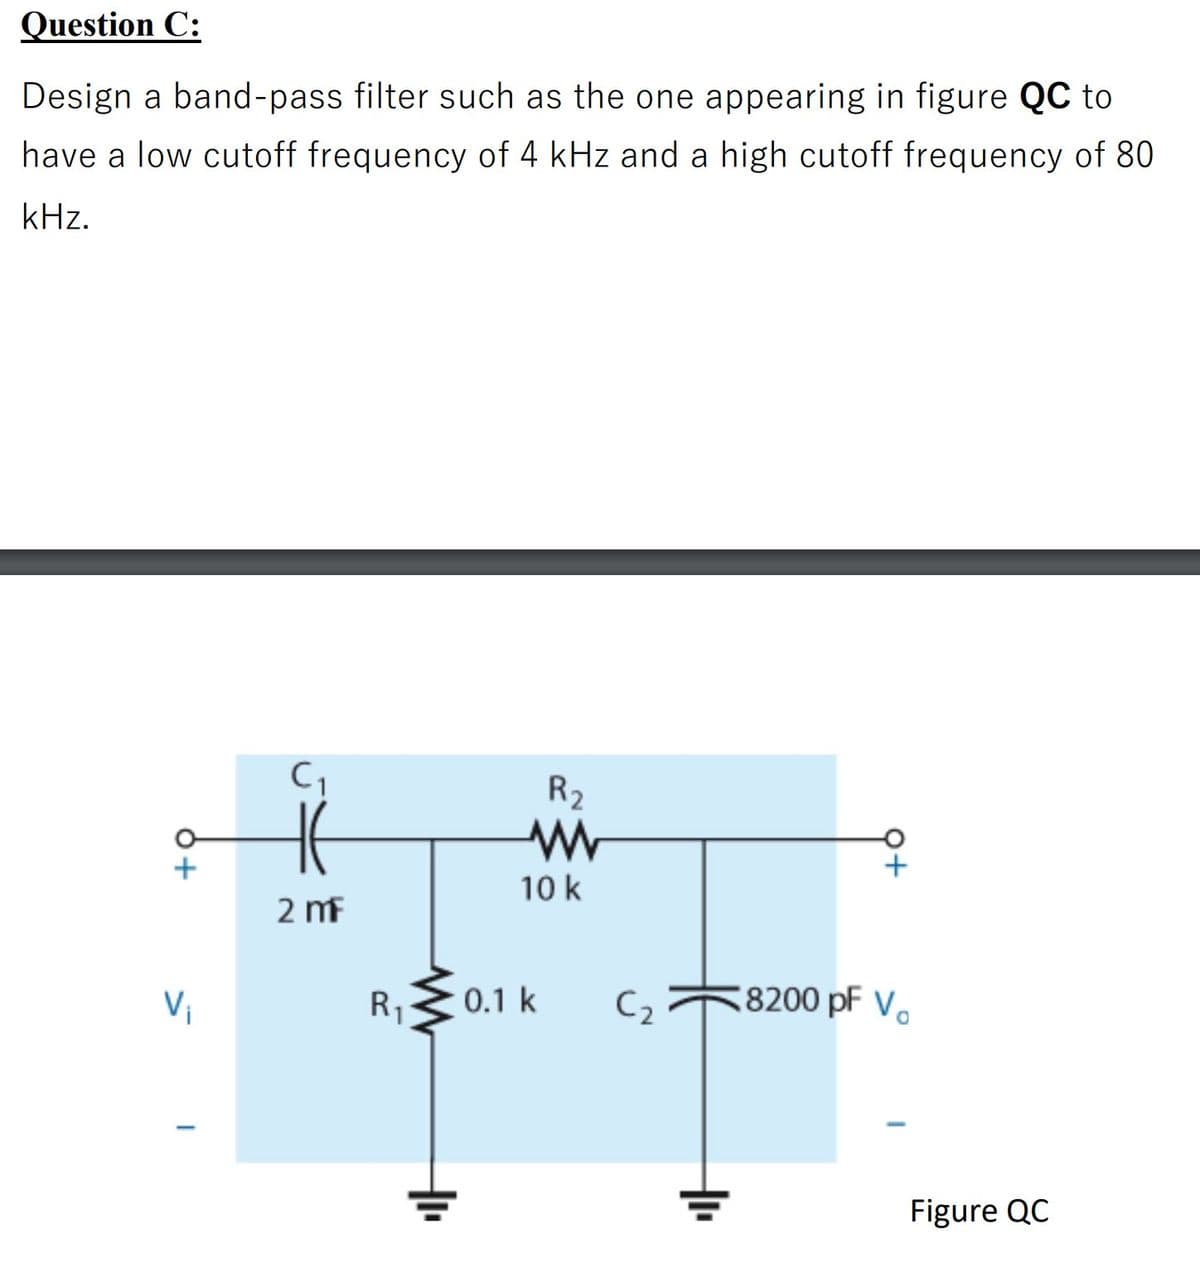 Question C:
Design a band-pass filter such as the one appearing in figure QC to
have a low cutoff frequency of 4 kHz and a high cutoff frequency of 80
kHz.
R2
10 k
2 mf
Vi
R1
0.1 k
C2
8200 pF V.
Figure QC
오+
